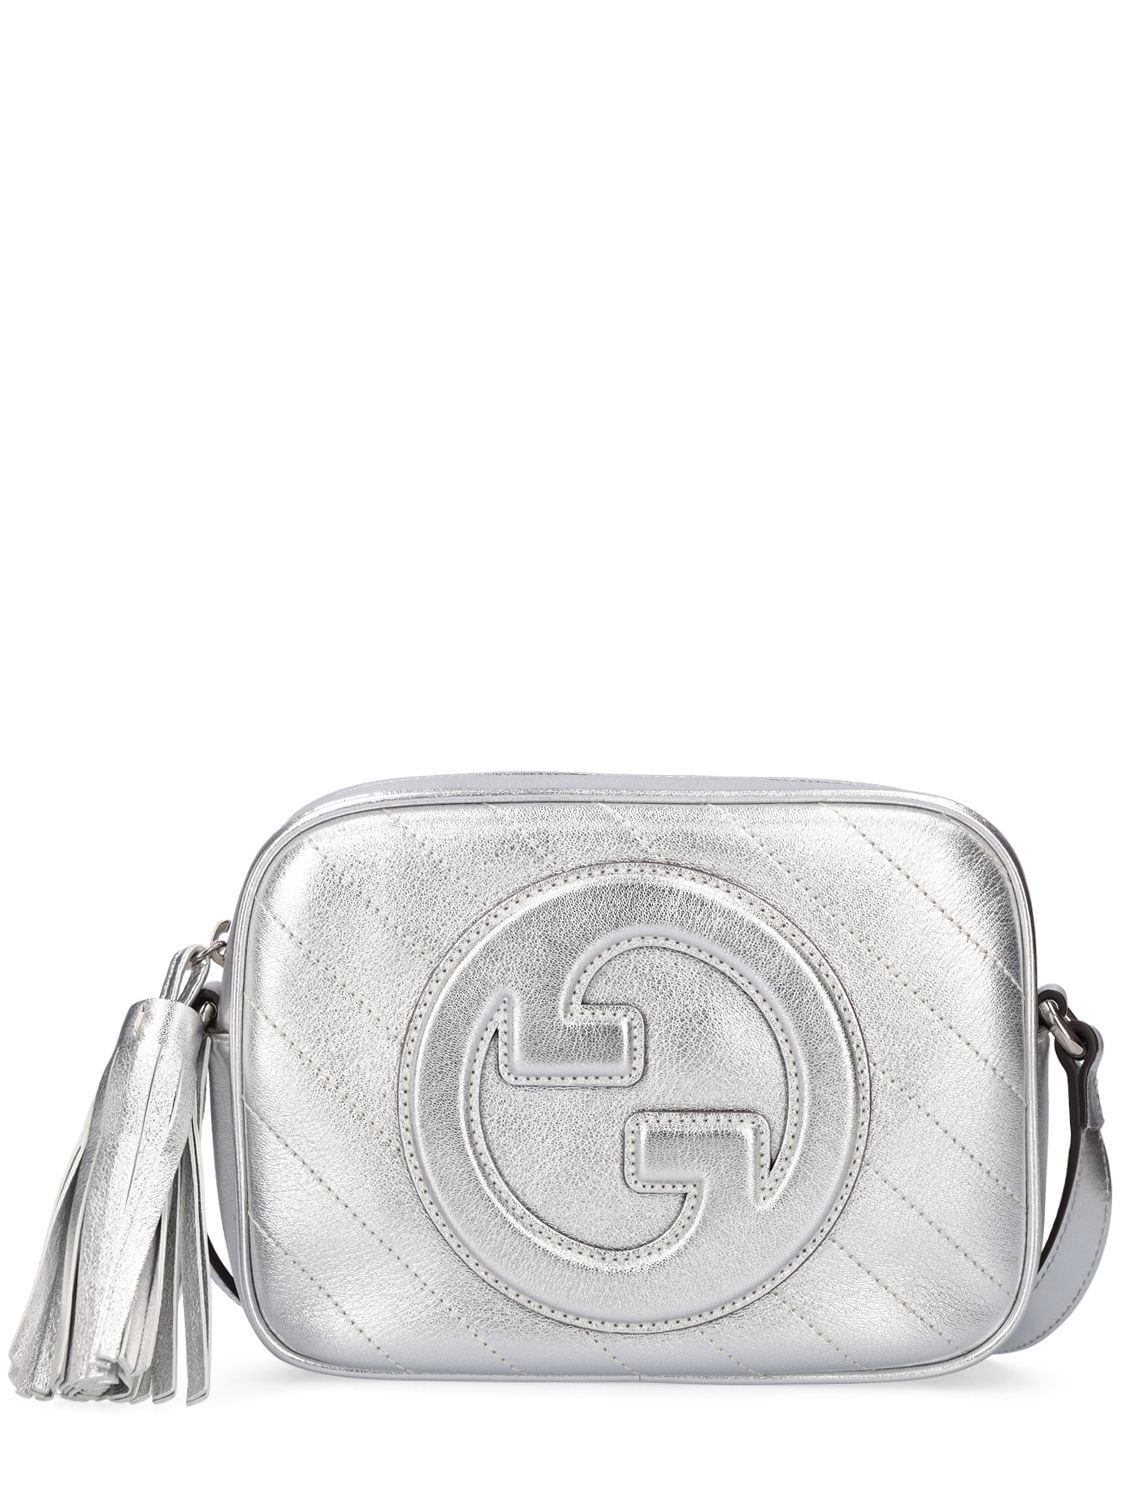 Gucci Blondie Leather Shoulder Bag In Silver